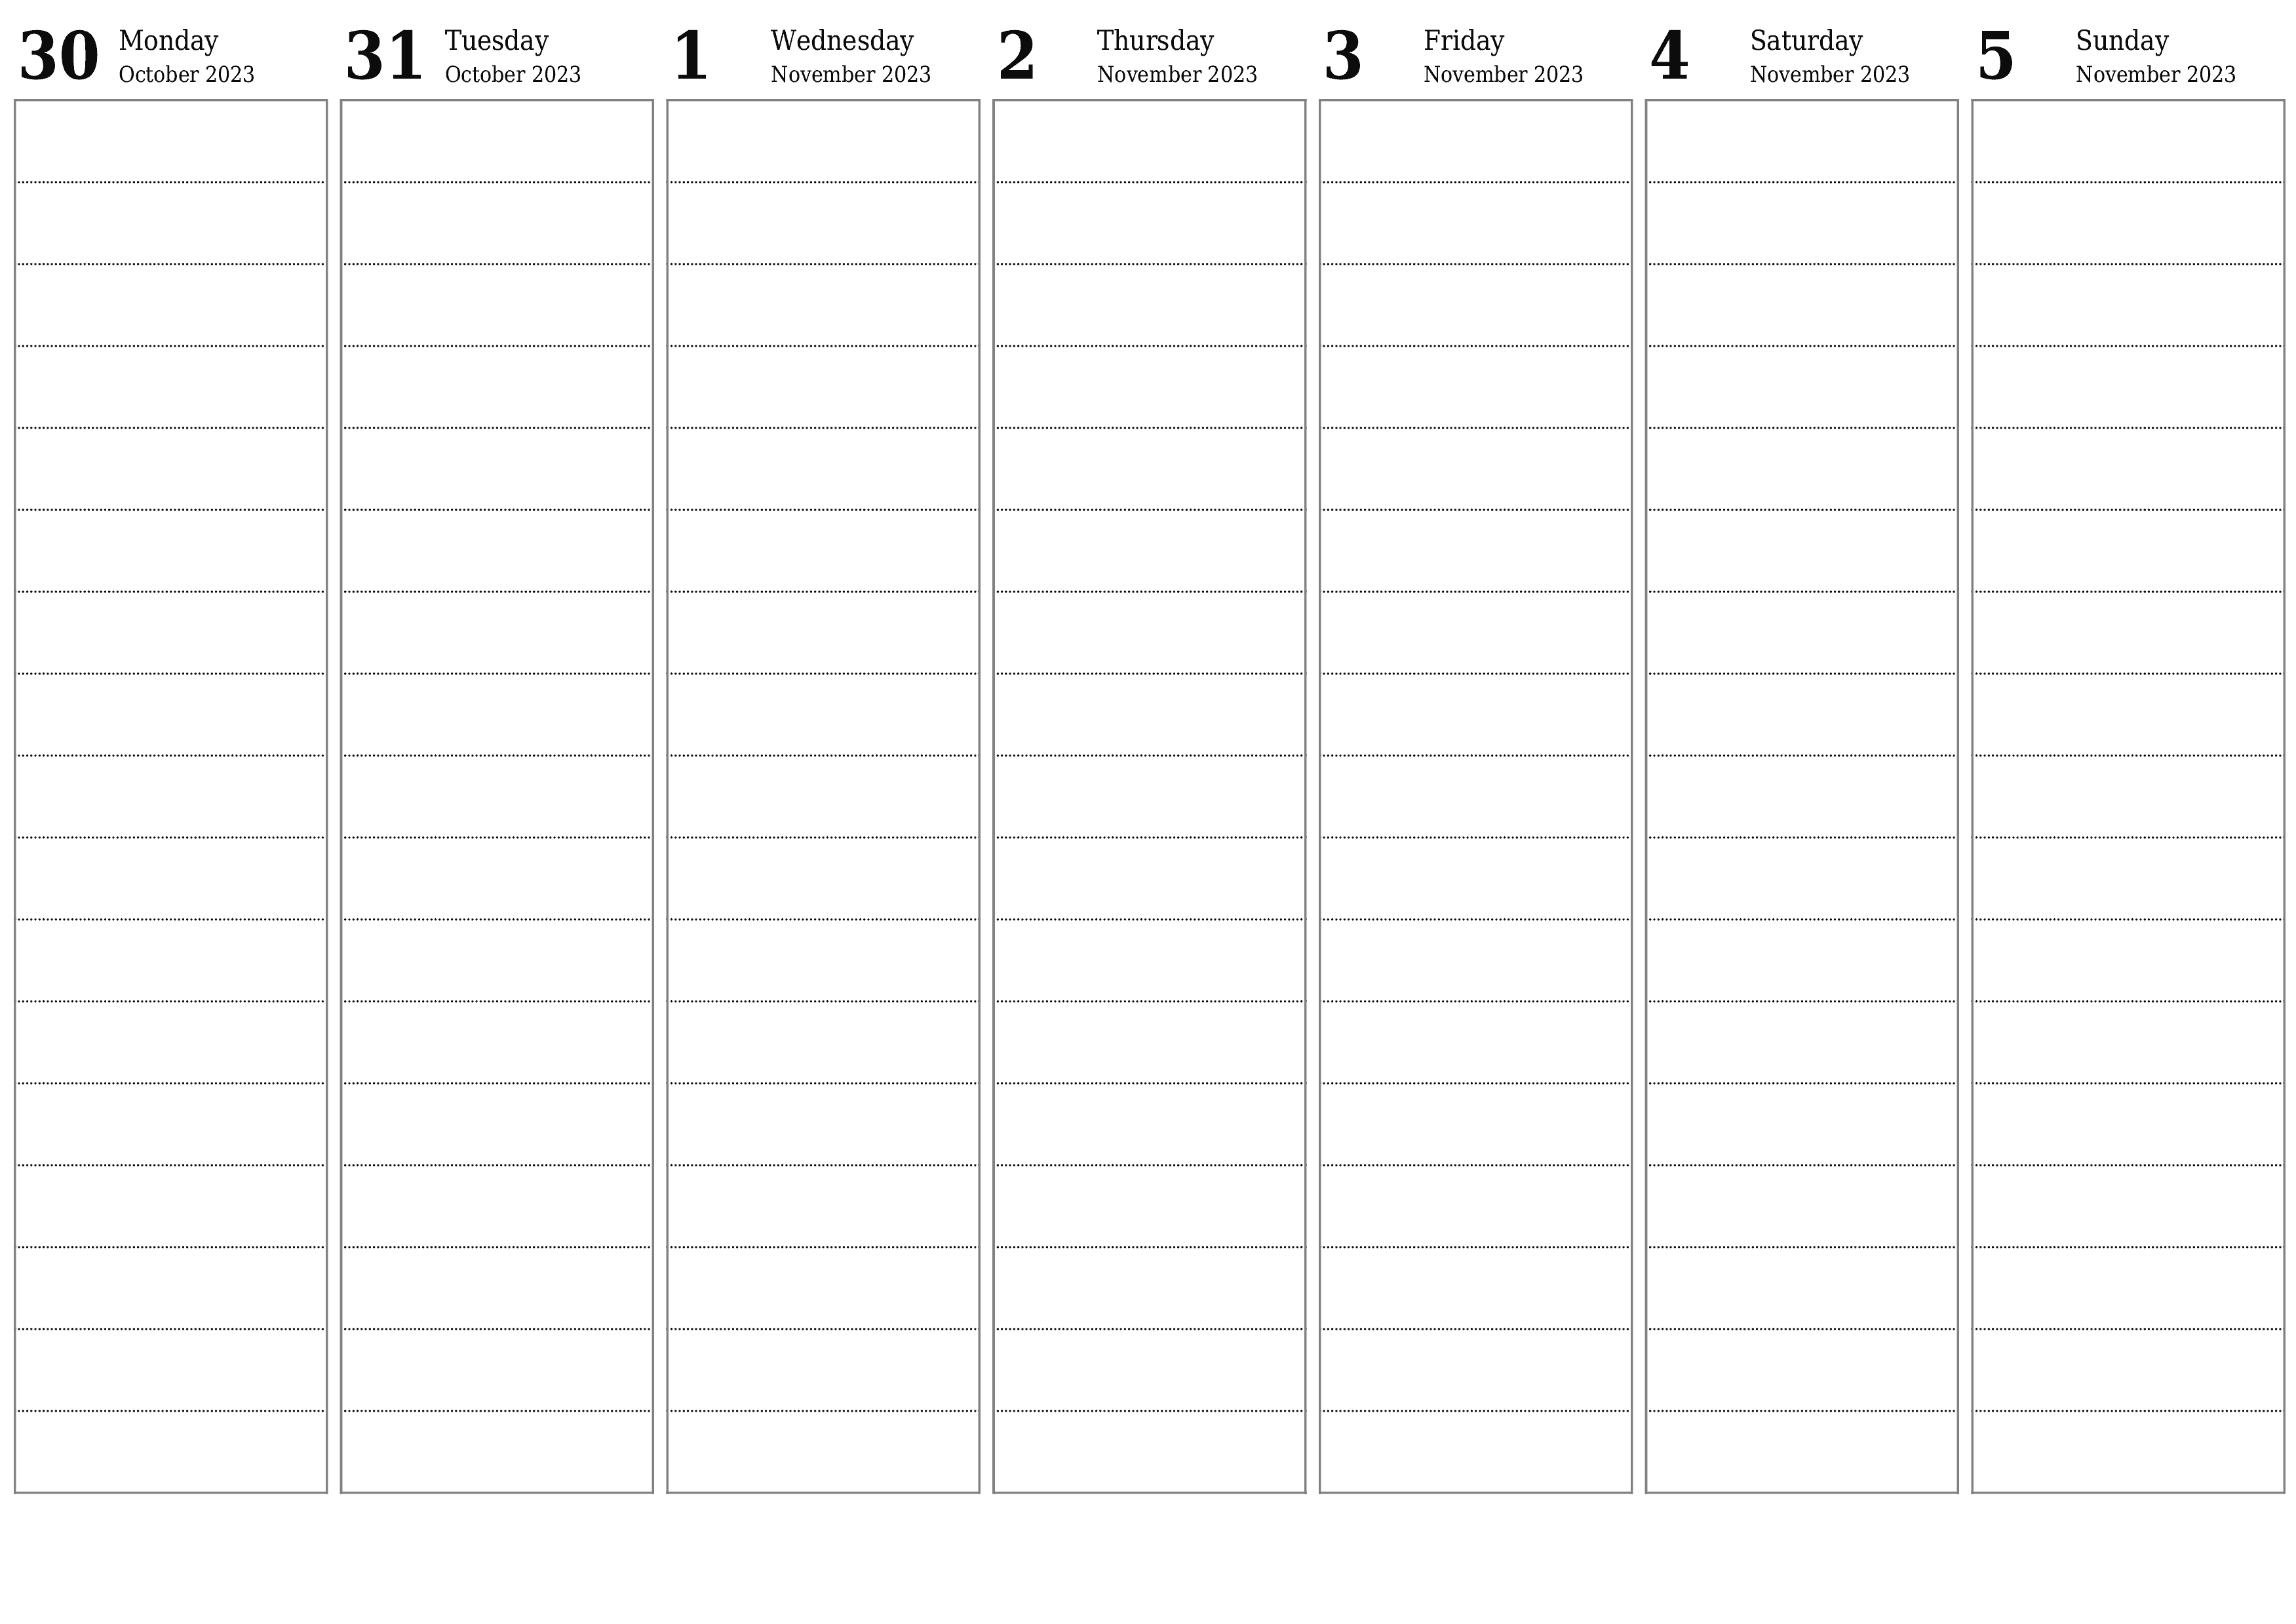 Blank weekly printable calendar and planner for week November 2023 with notes, save and print to PDF PNG English